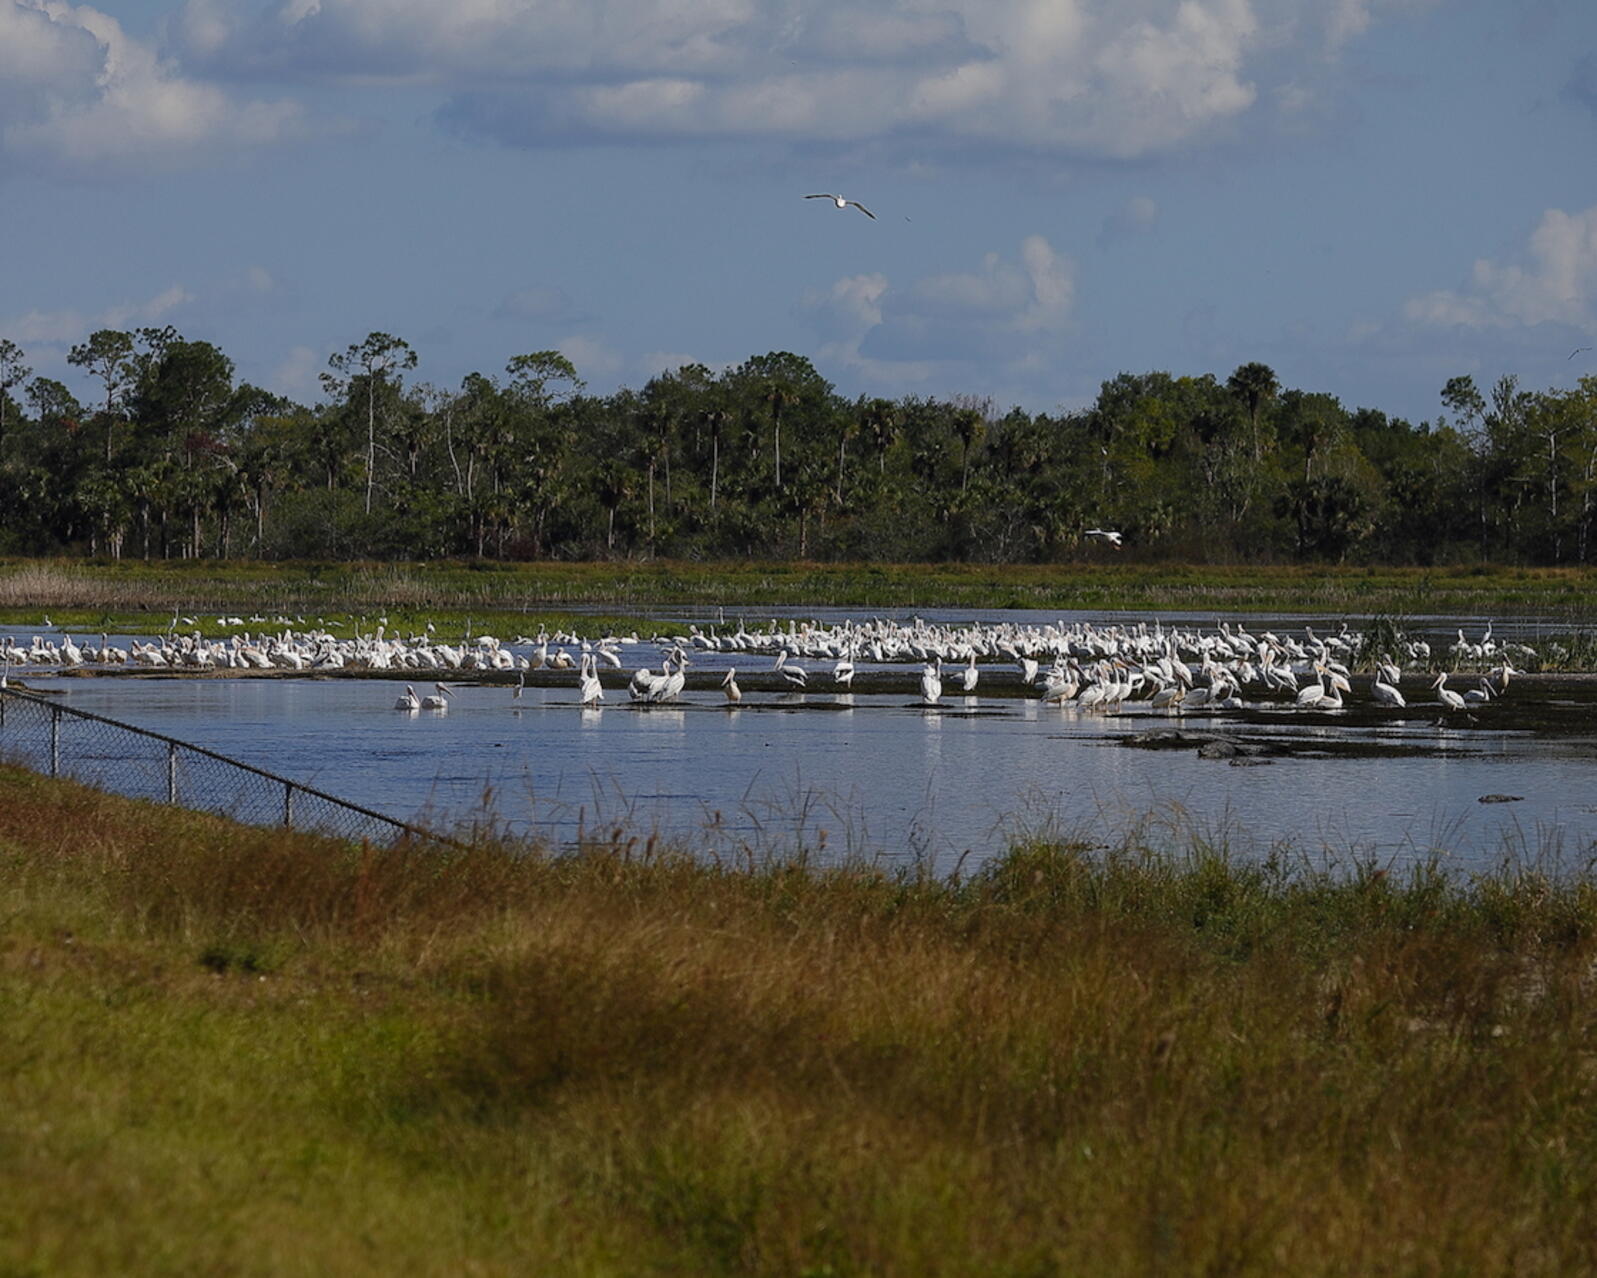 Wading birds and American White Pelicans using the spreader apron on the newly restored Merritt Canal portion of Picayune Strand Restoration Project. Photo: Ken Humiston